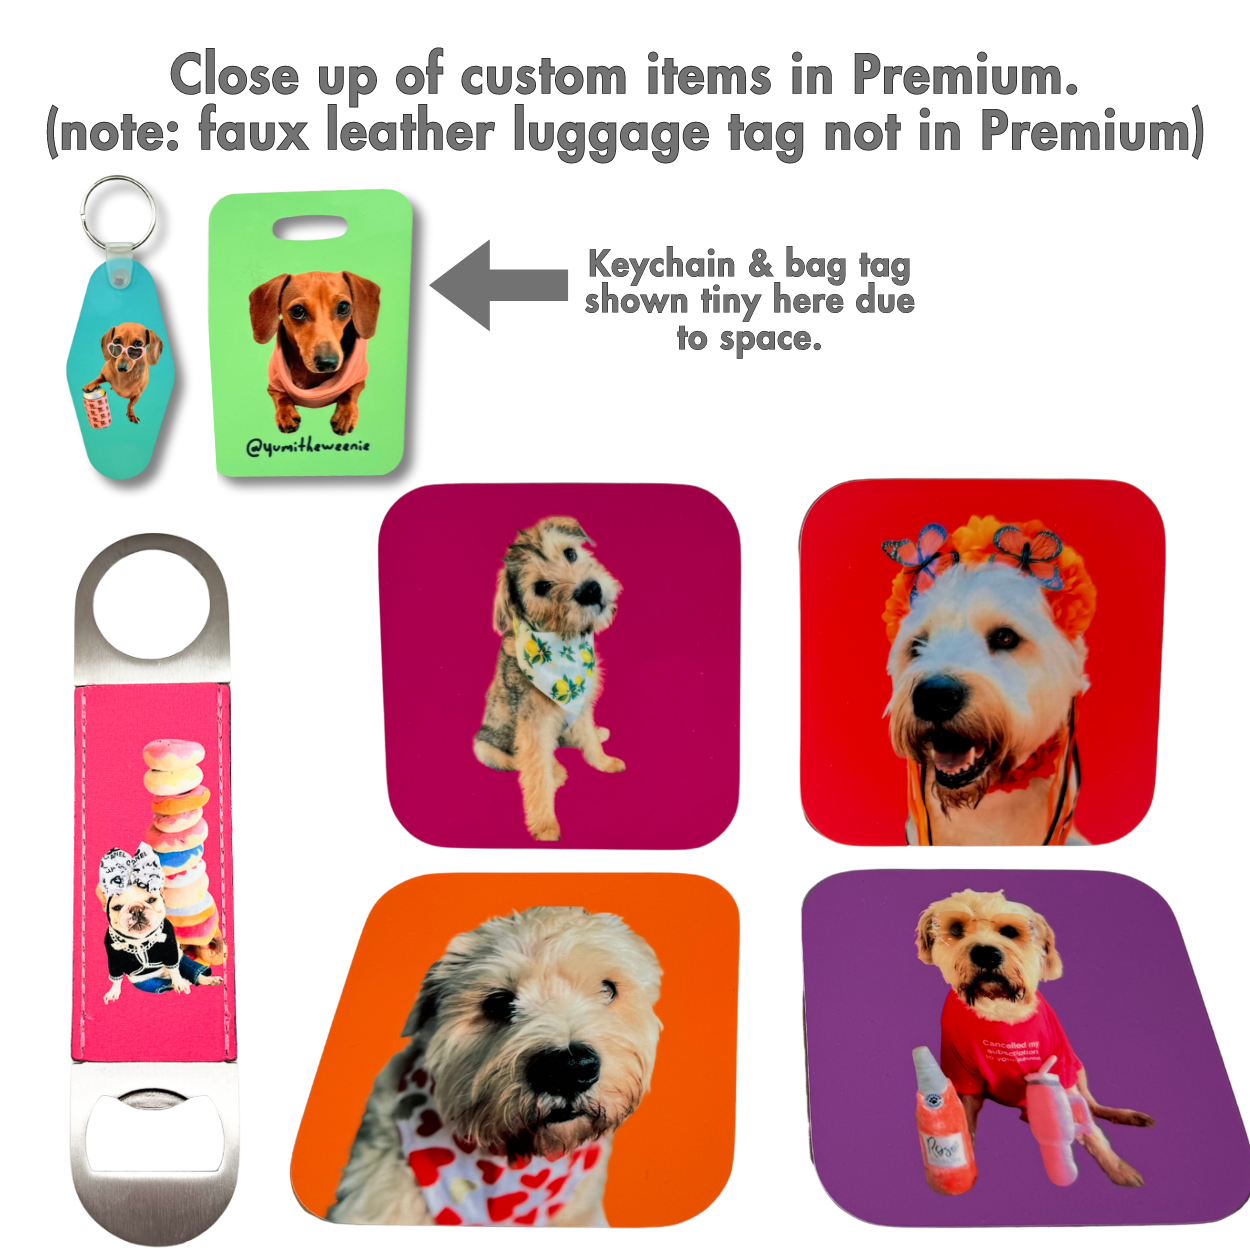 Custom items in Premium Dog Mom Day Basket: colorful photo drink coasters (4), photo bottle opener, bag tag, and custom keychain. Photos can be dogs, kids, families, art, etc.